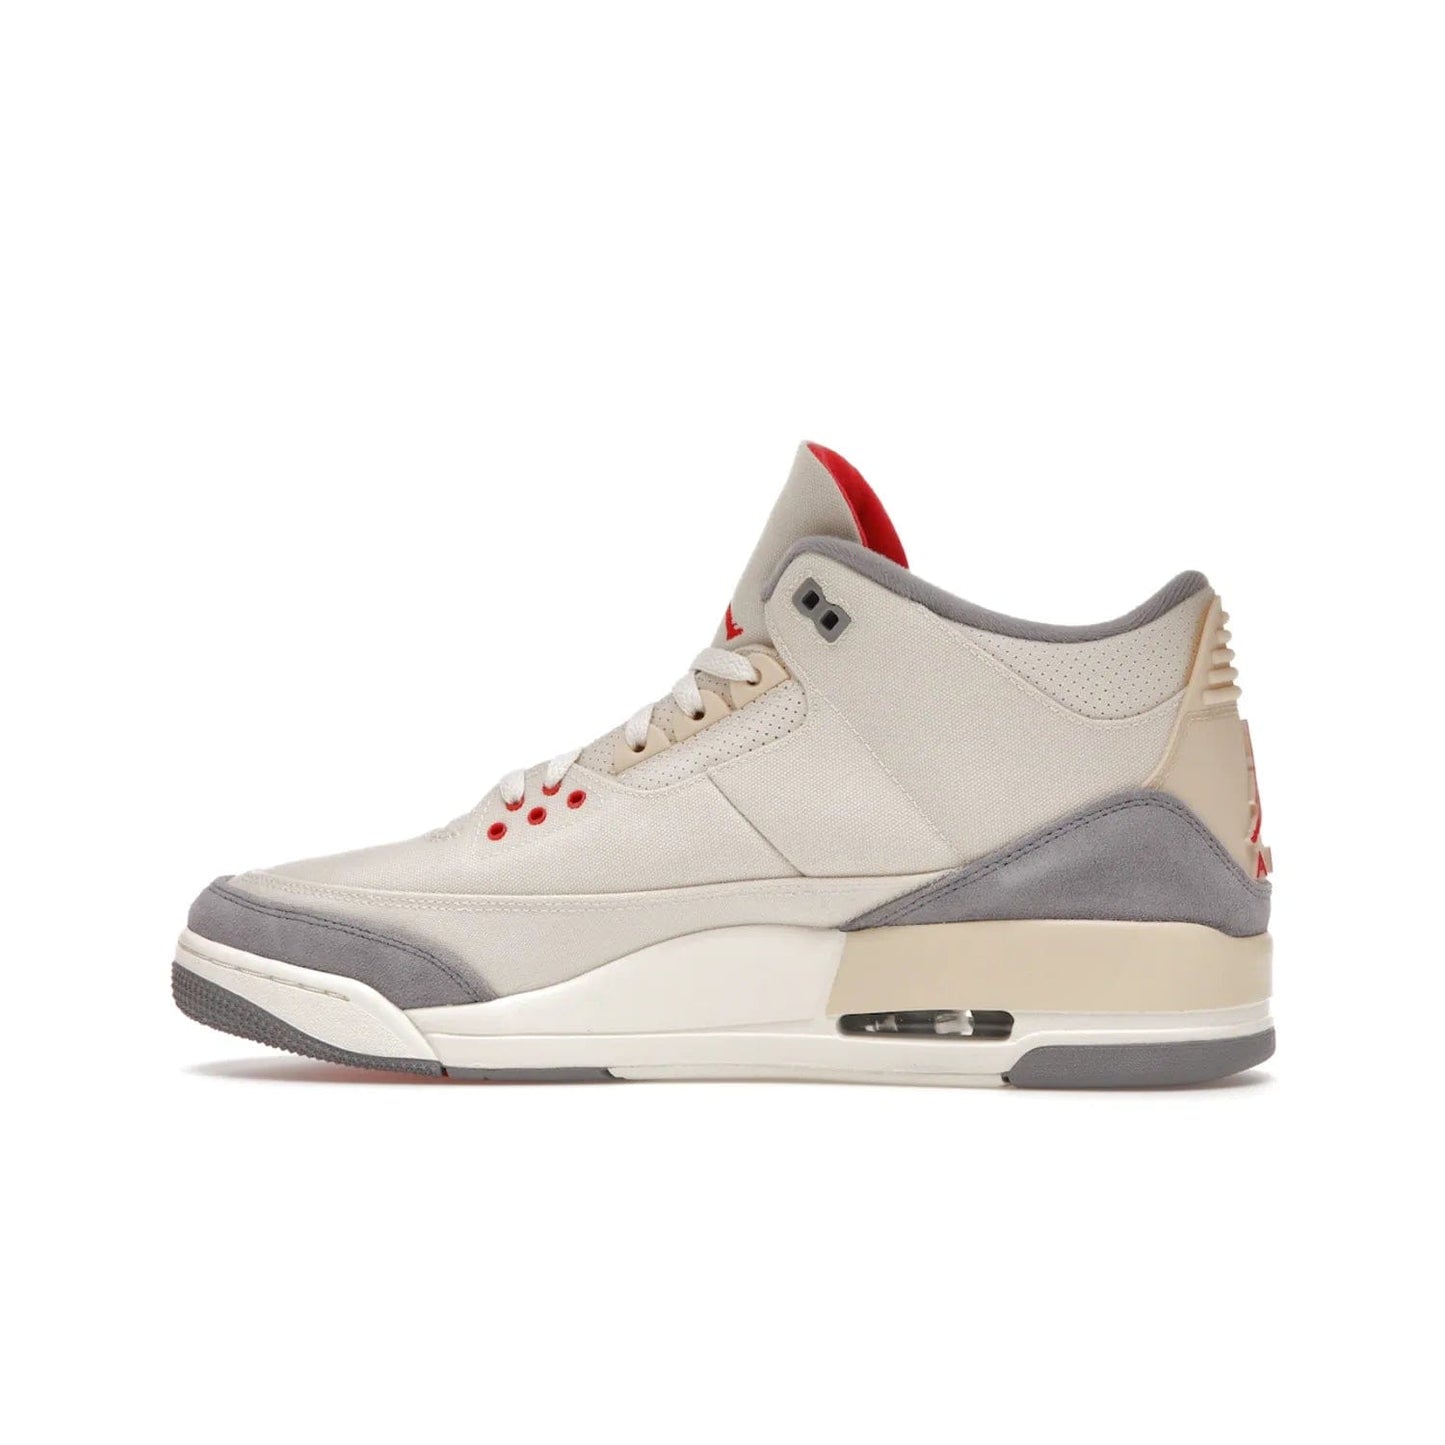 Jordan 3 Retro Muslin - Image 20 - Only at www.BallersClubKickz.com - Eye-catching Air Jordan 3 Retro Muslin in a neutral palette of grey, cream, and red. Featuring canvas upper, suede overlays and white/grey Air Max sole. Available in March 2022.